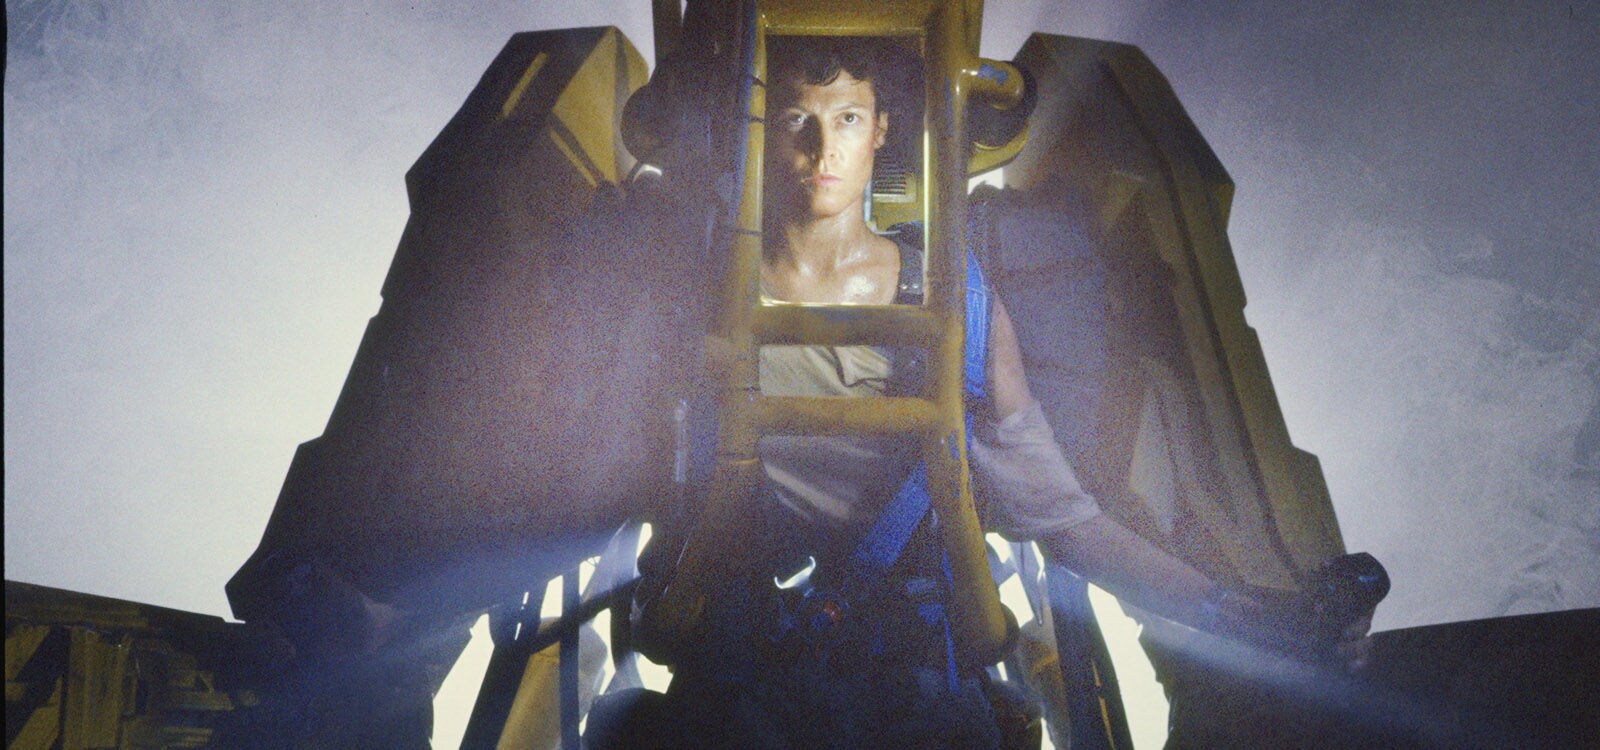 Actor Sigourney Weaver (as Ridley) wearing Powerloader suit in the film "Aliens."